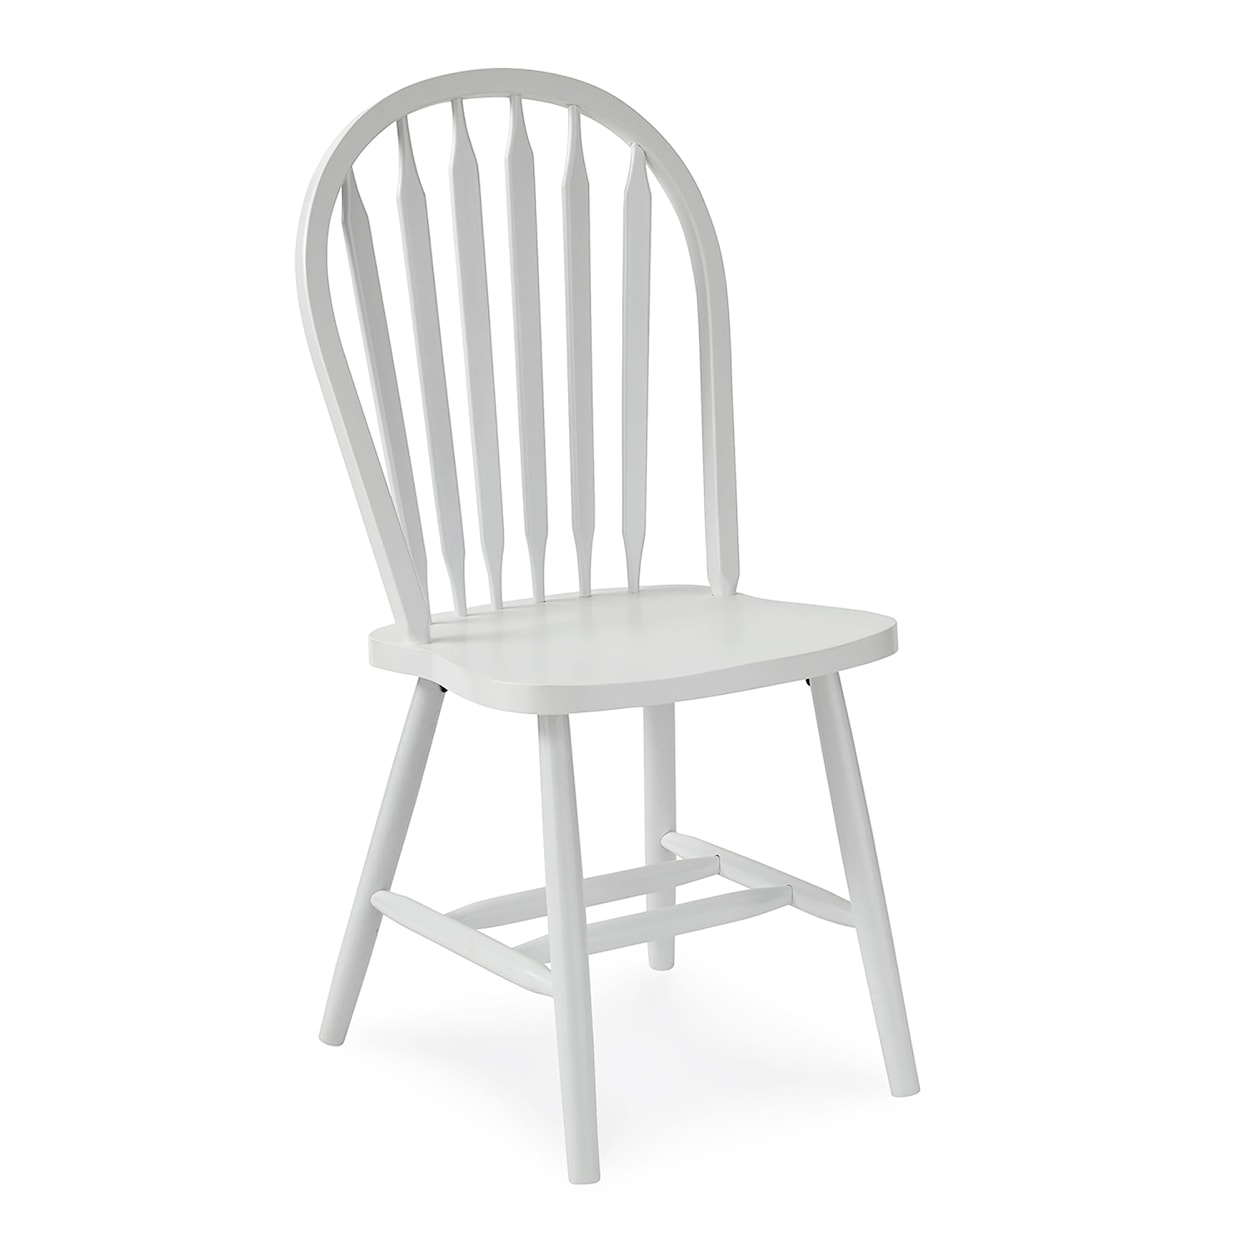 John Thomas Dining Essentials Windsor Arrowback Chair in Pure White